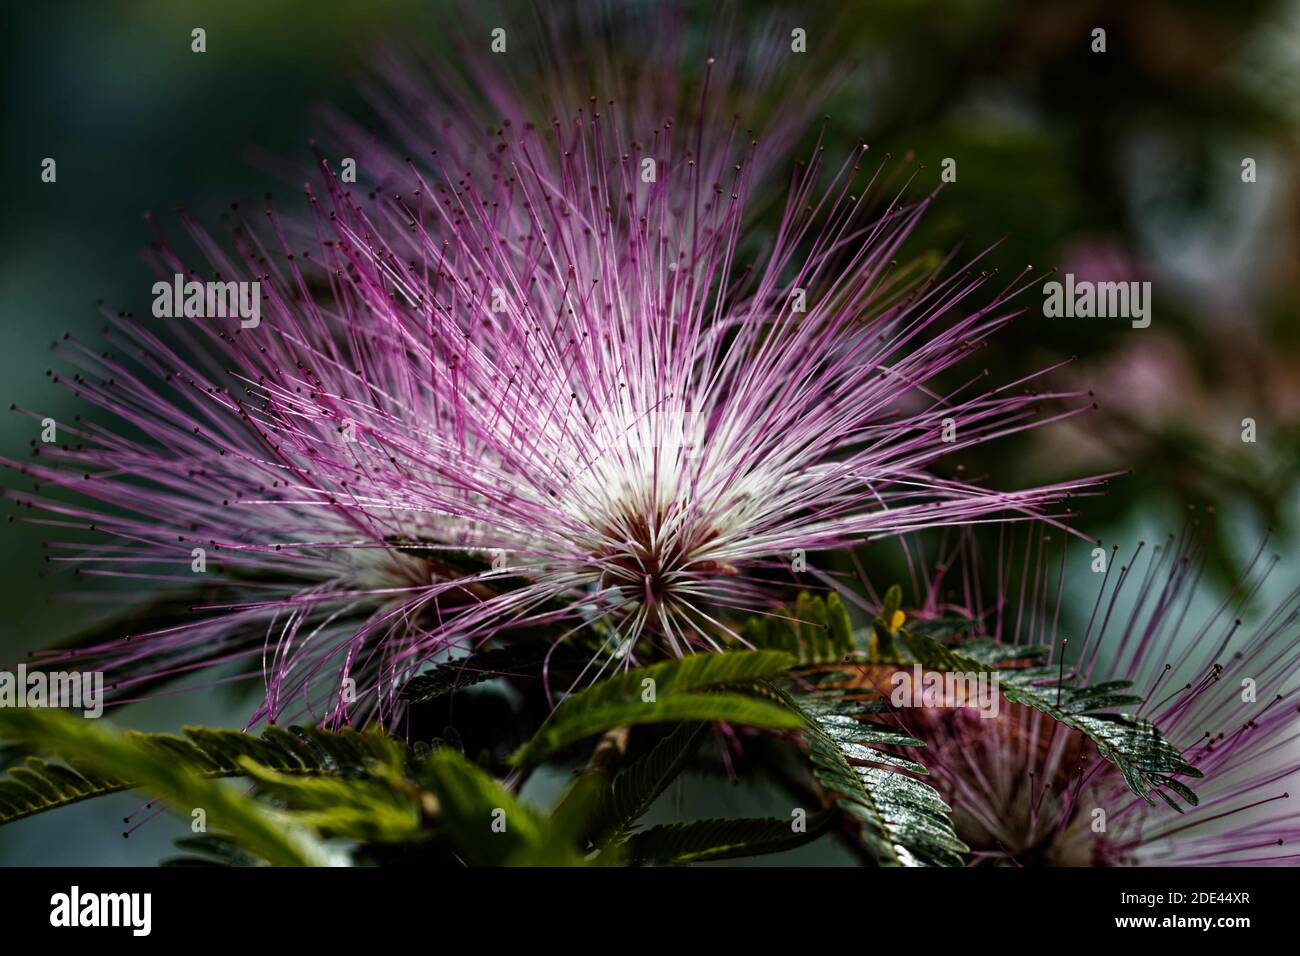 Calliandra surinamensis is a low branching evergreen tropical shrub that is named after Suriname, a country in Northern South America. Stock Photo